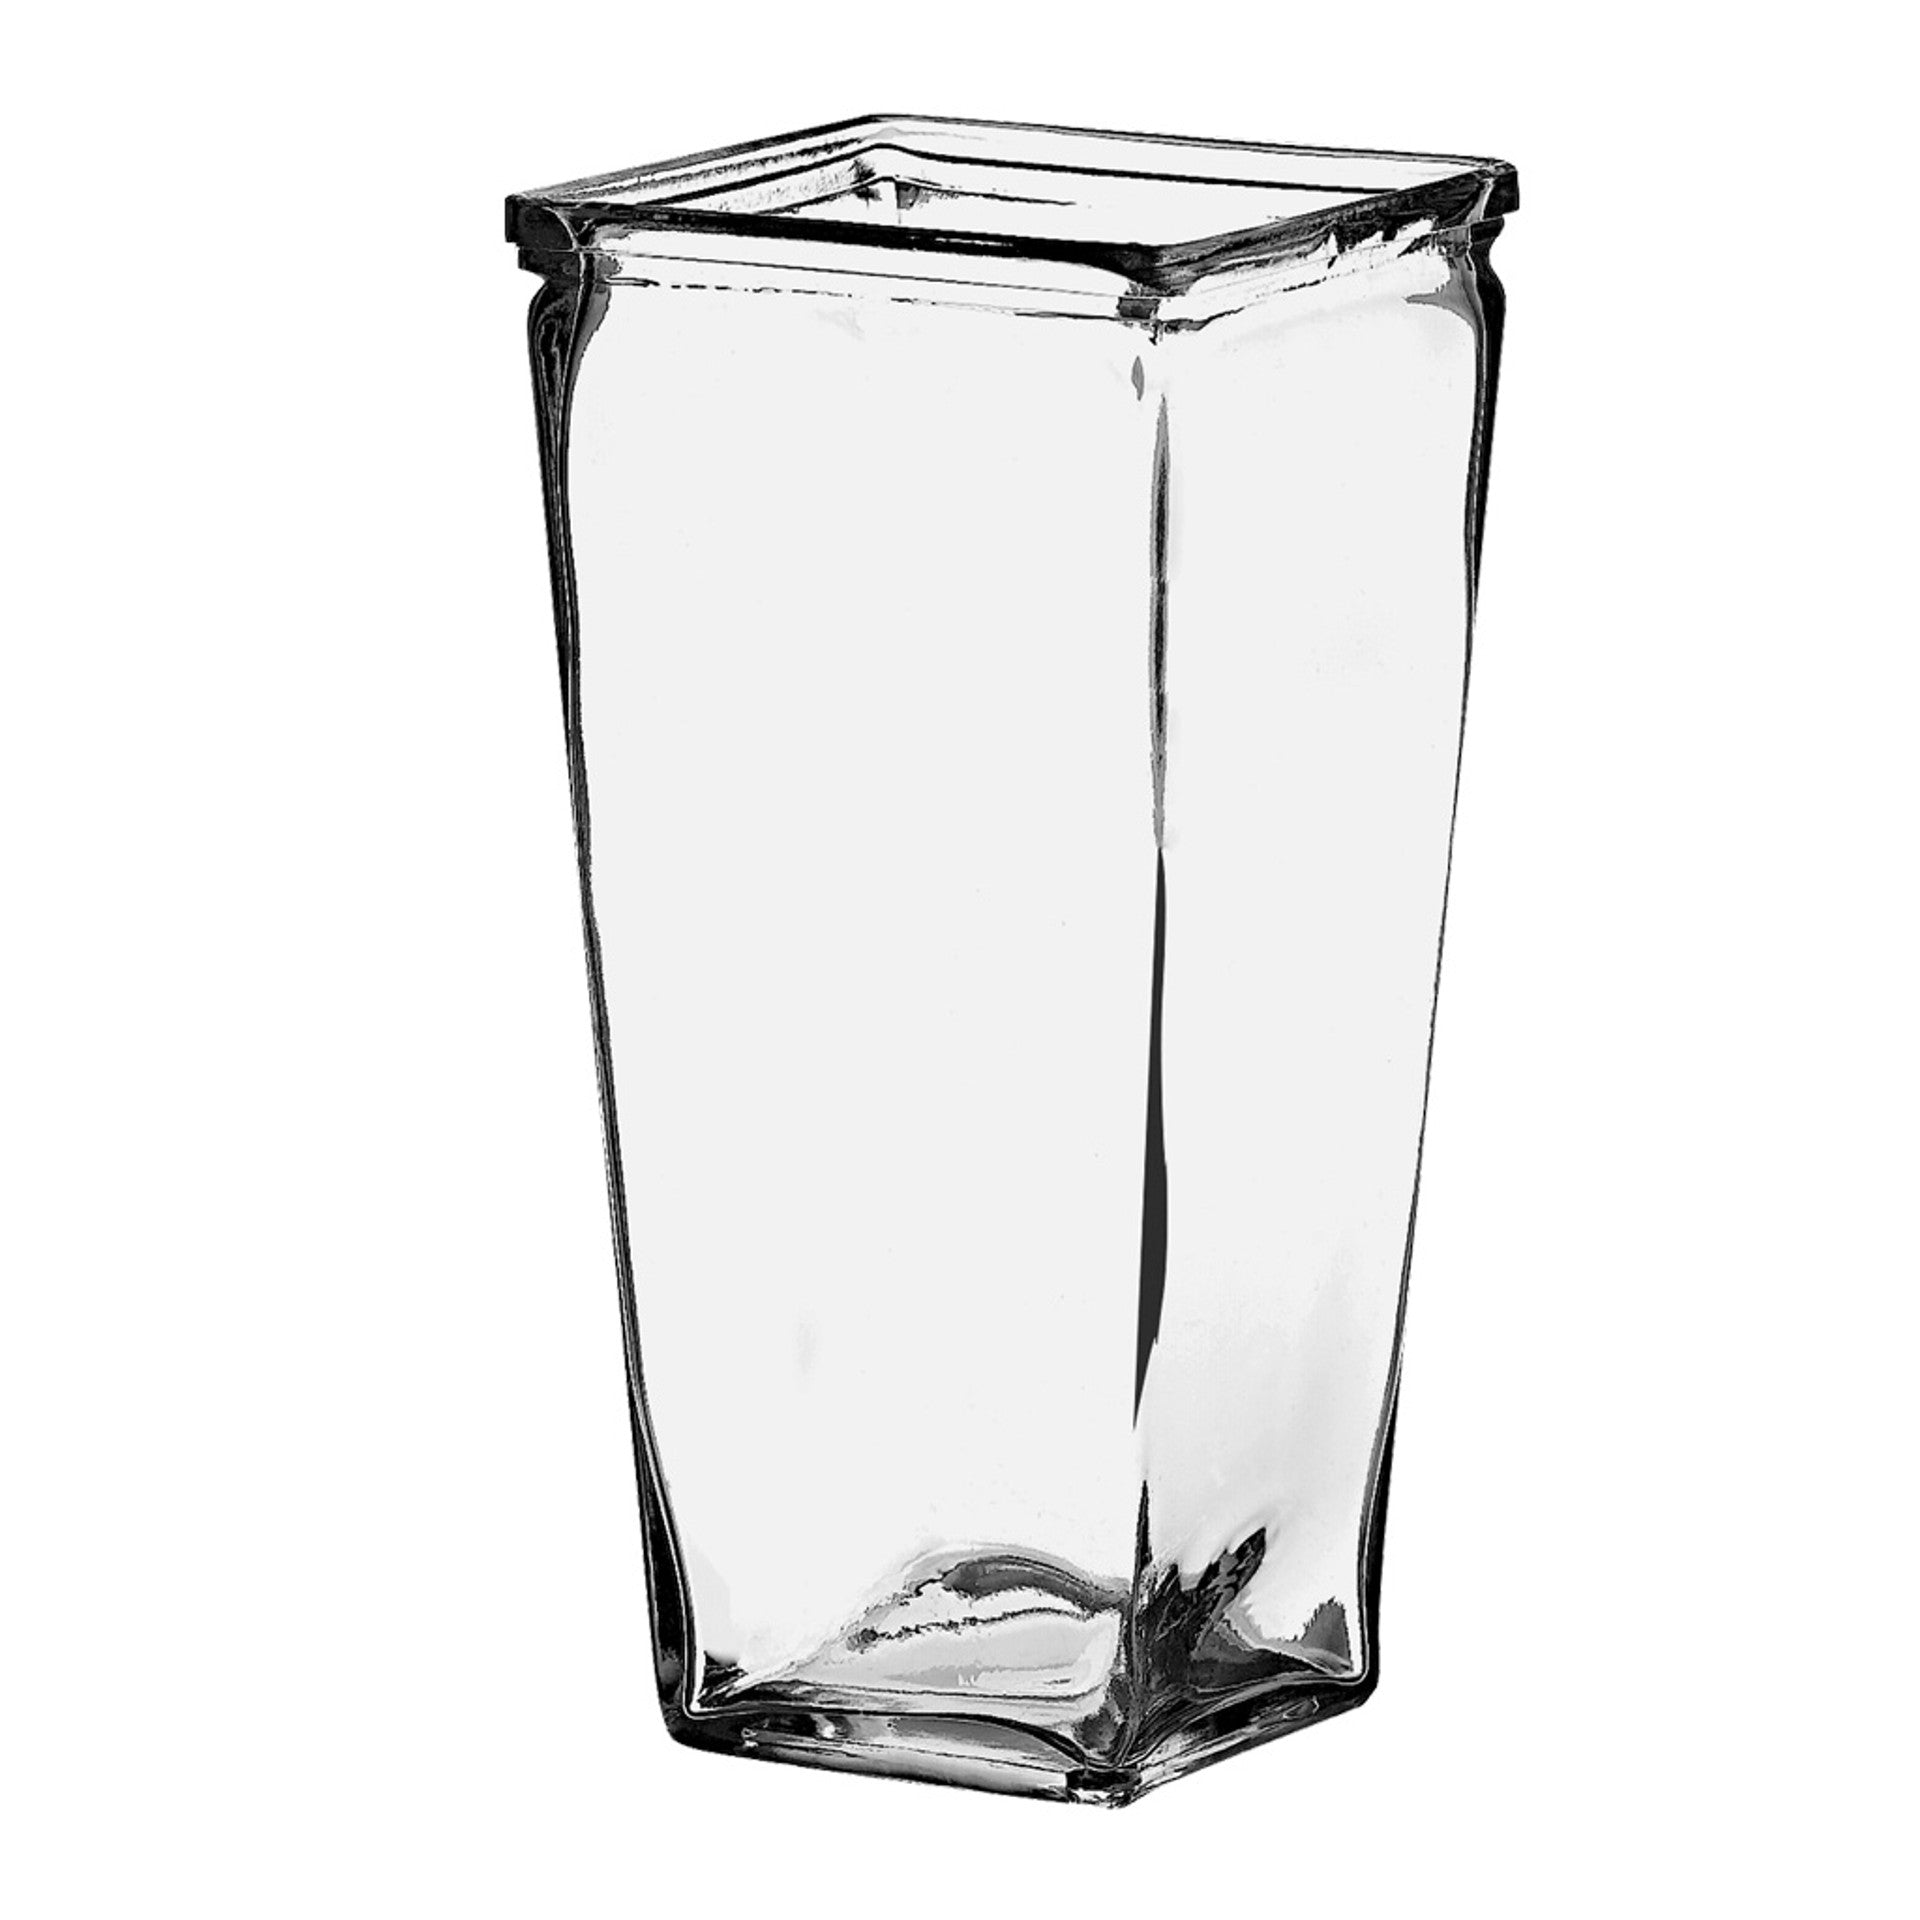 VMB7509 - Machined Tapered Block Vase - 9" (Various Colors)
